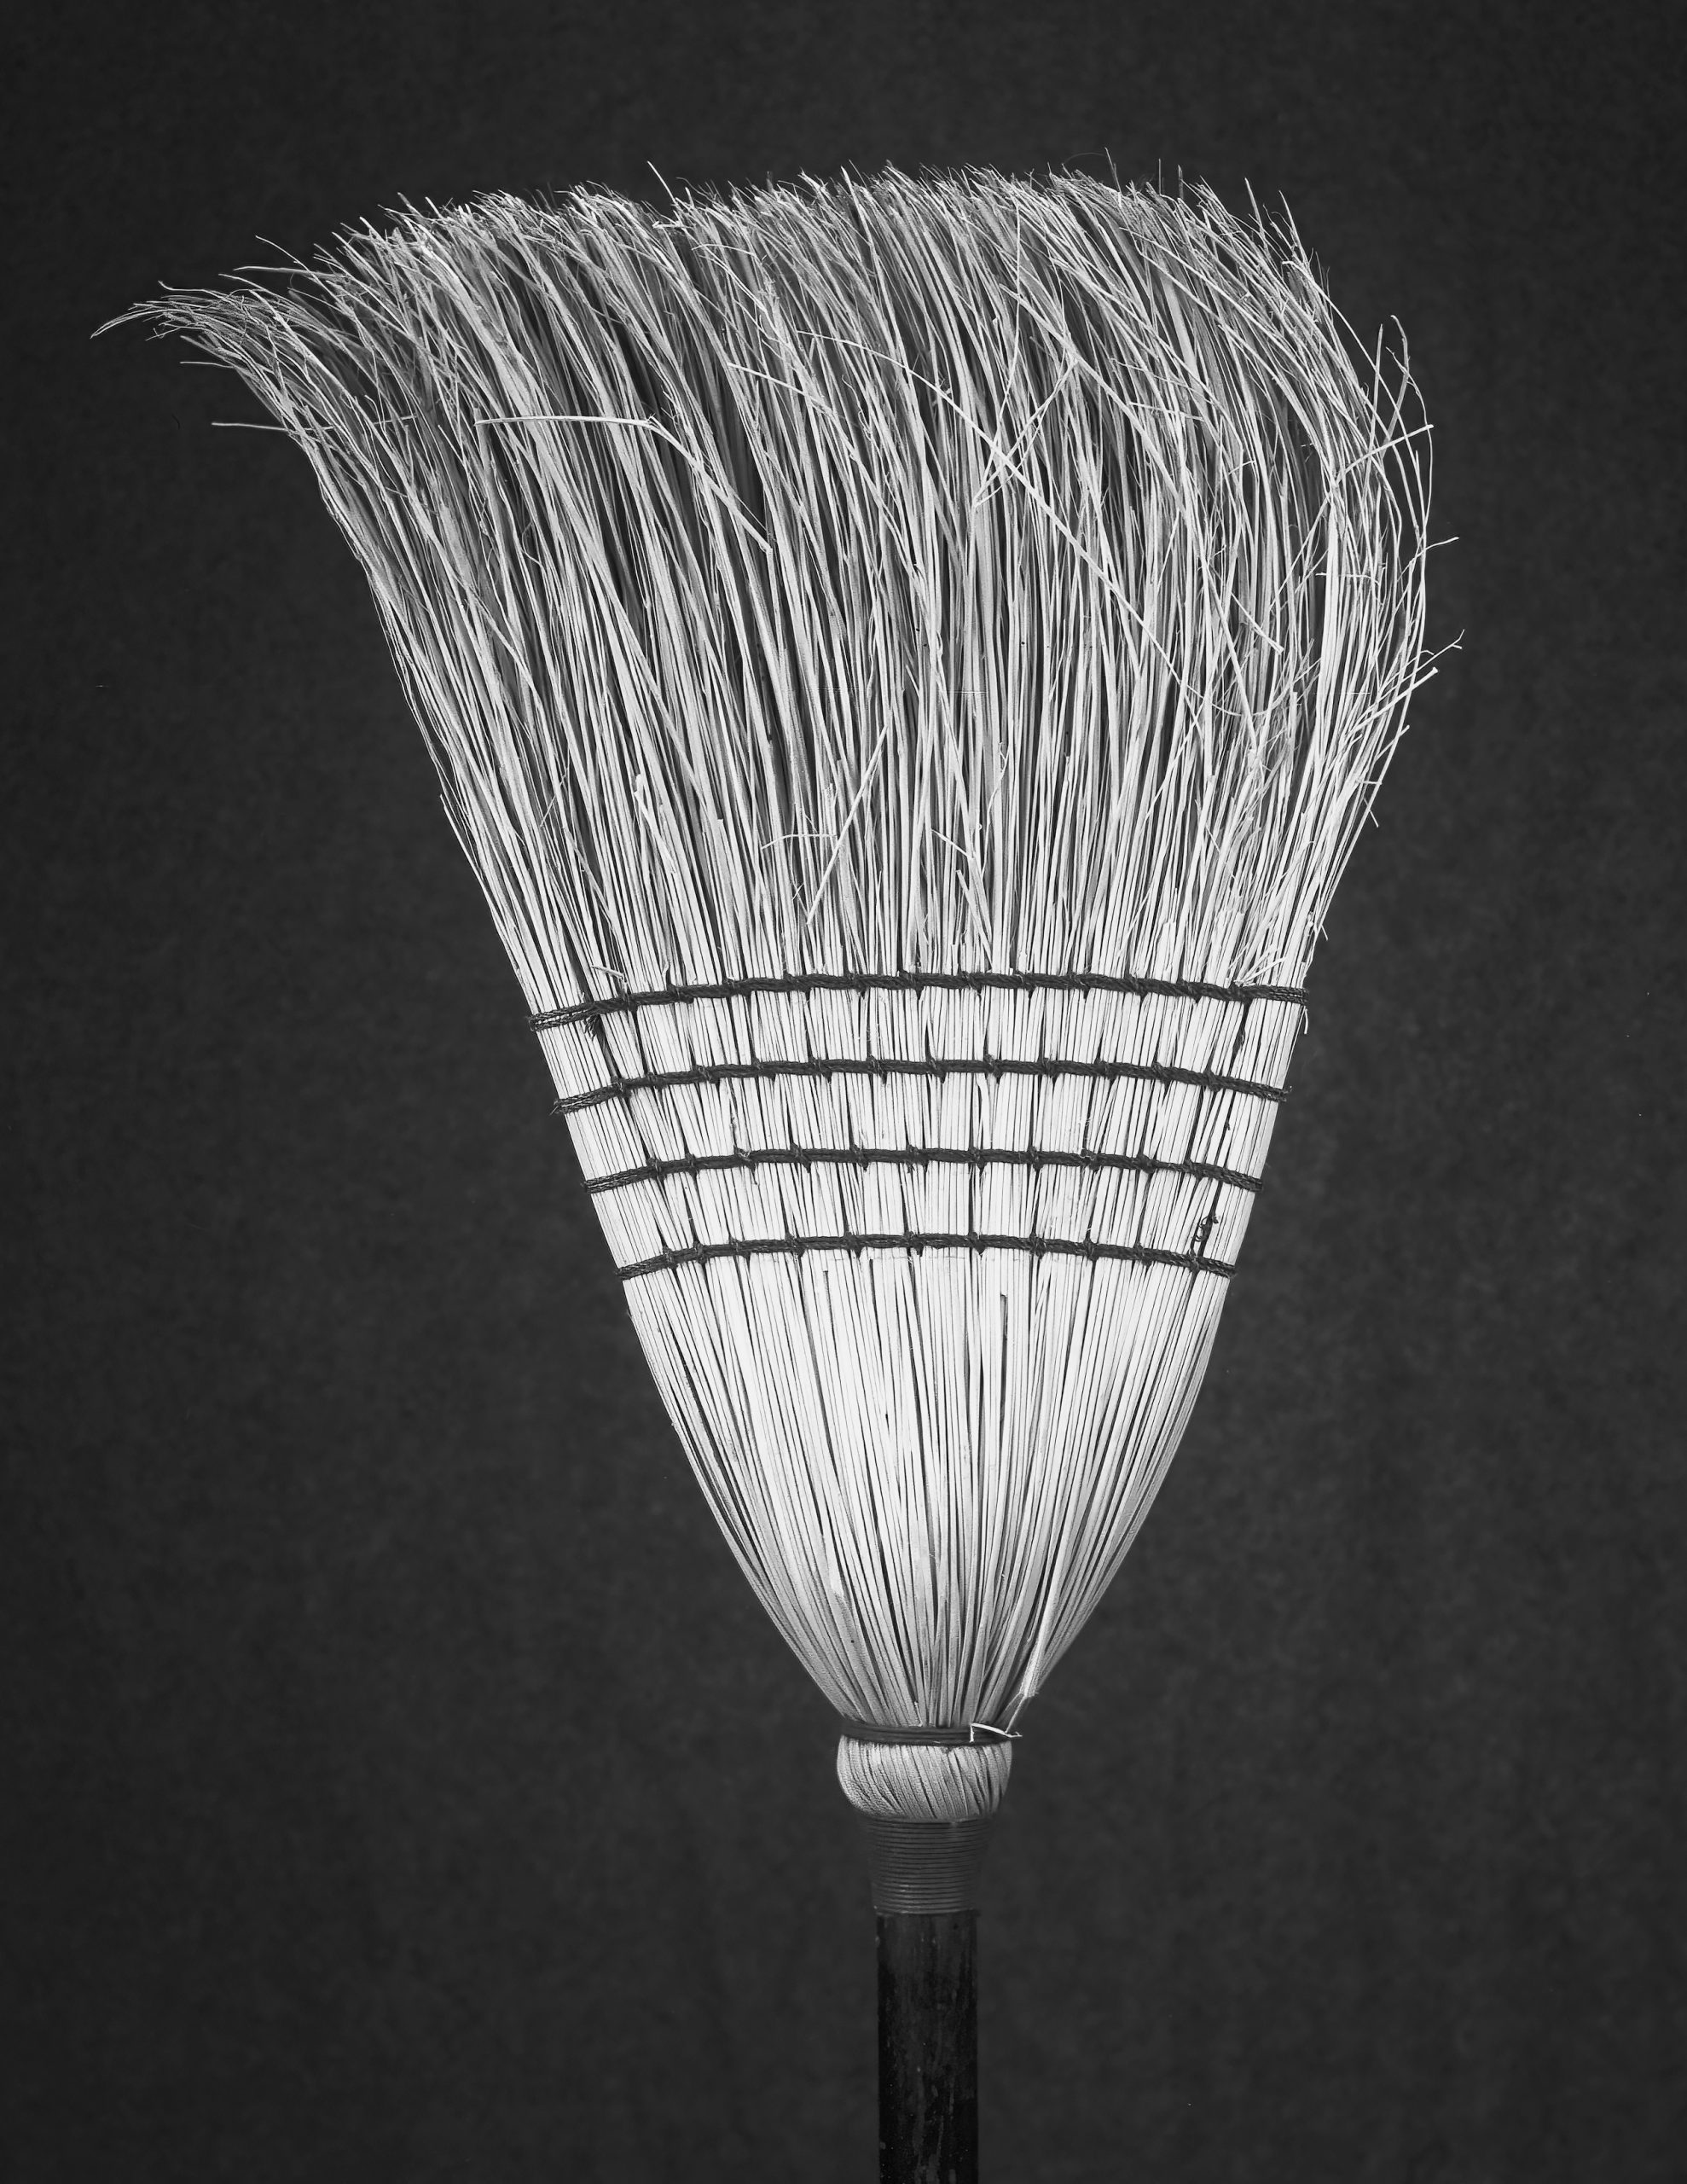 close up of an old broom. Captured on film